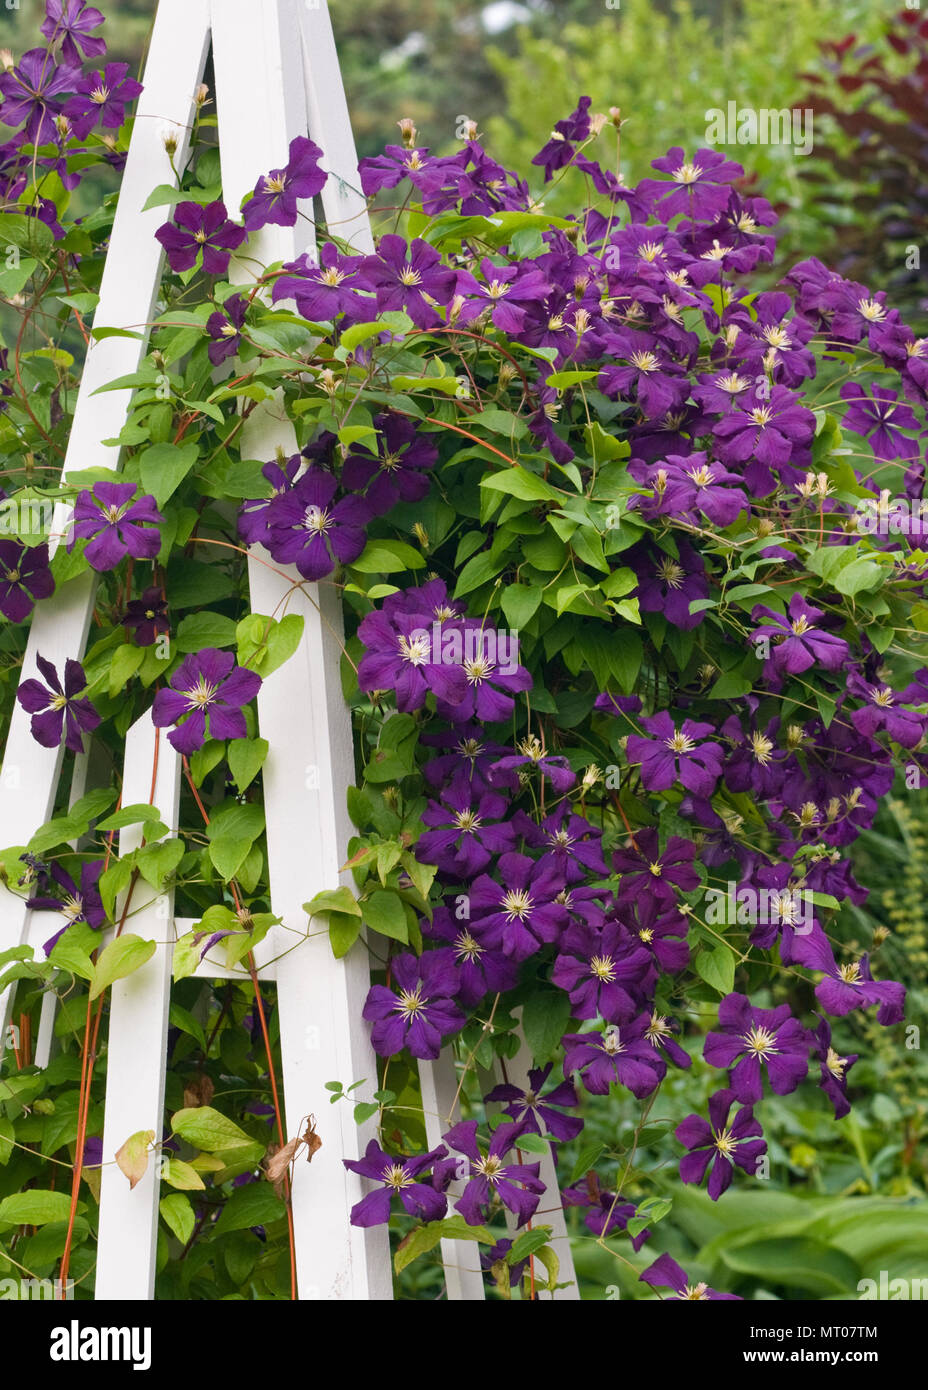 CLEMATIS 'ETOILE VIOLETTE' - VIOLET STAR CLEMATIS Stock Photo